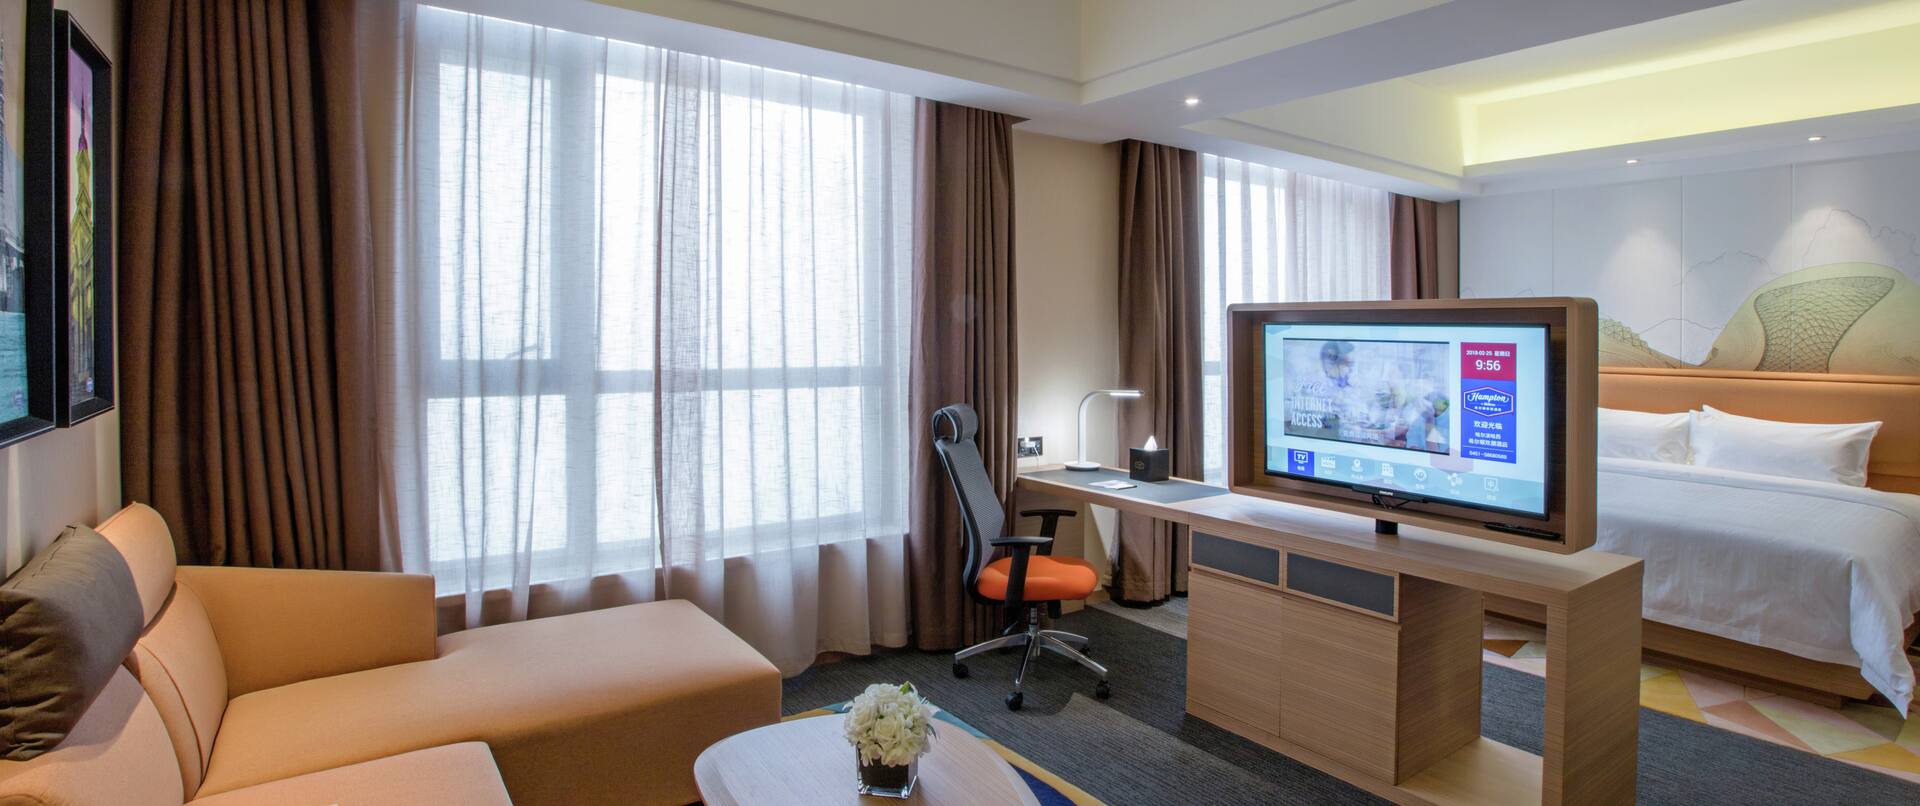 King Suite with Lounge Area and Room Technology